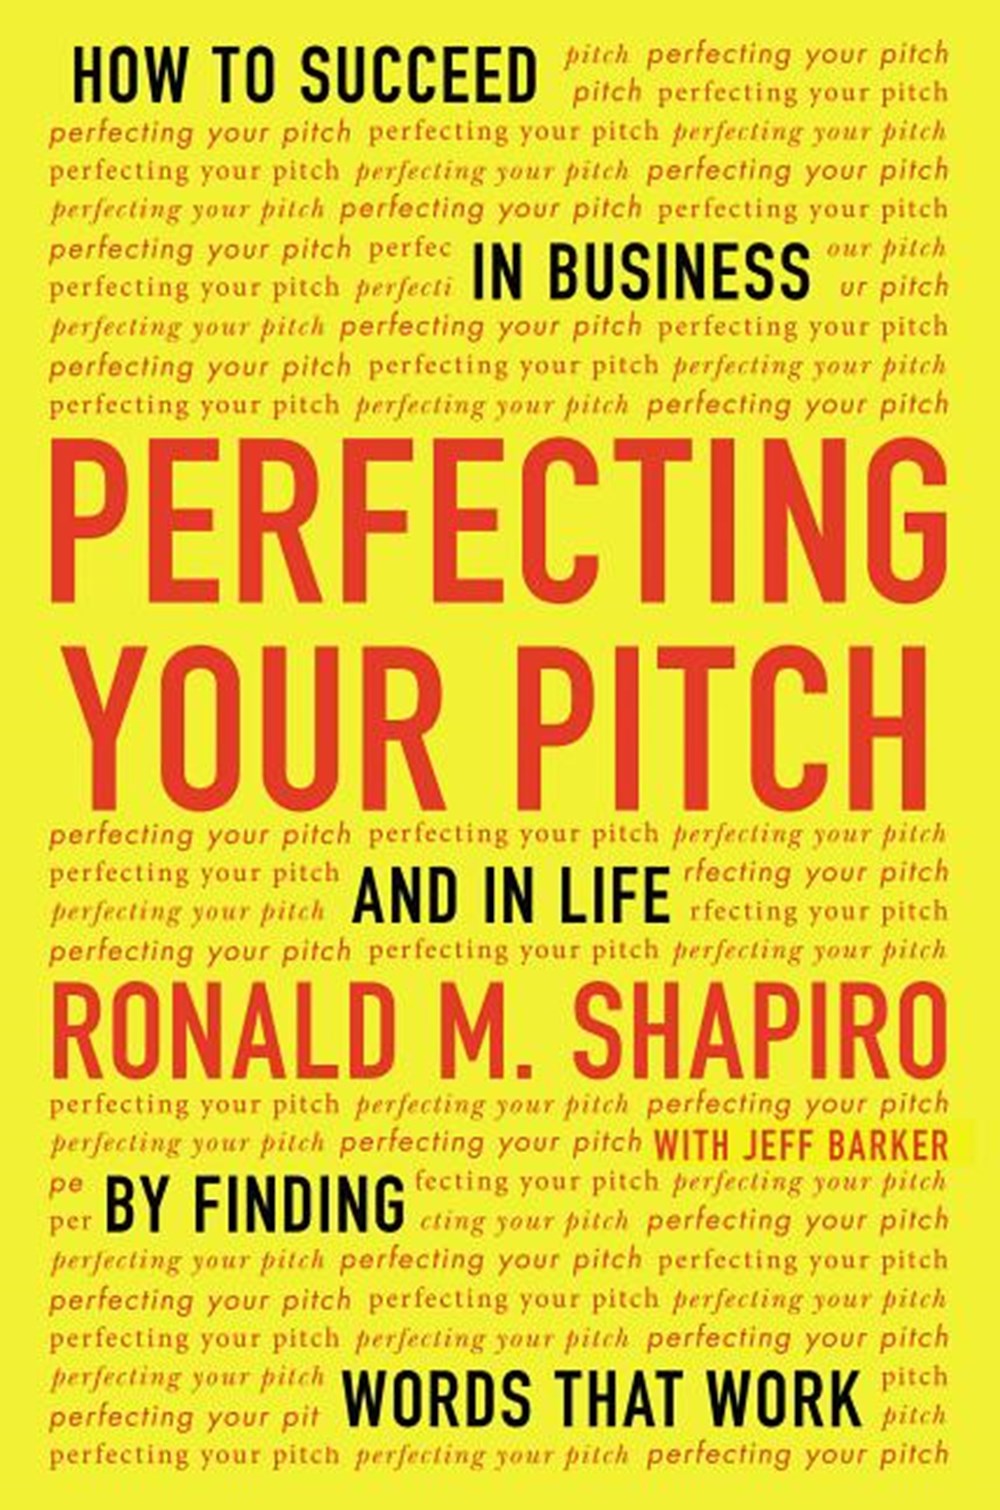 Perfecting Your Pitch How to Succeed in Business and in Life by Finding Words That Work